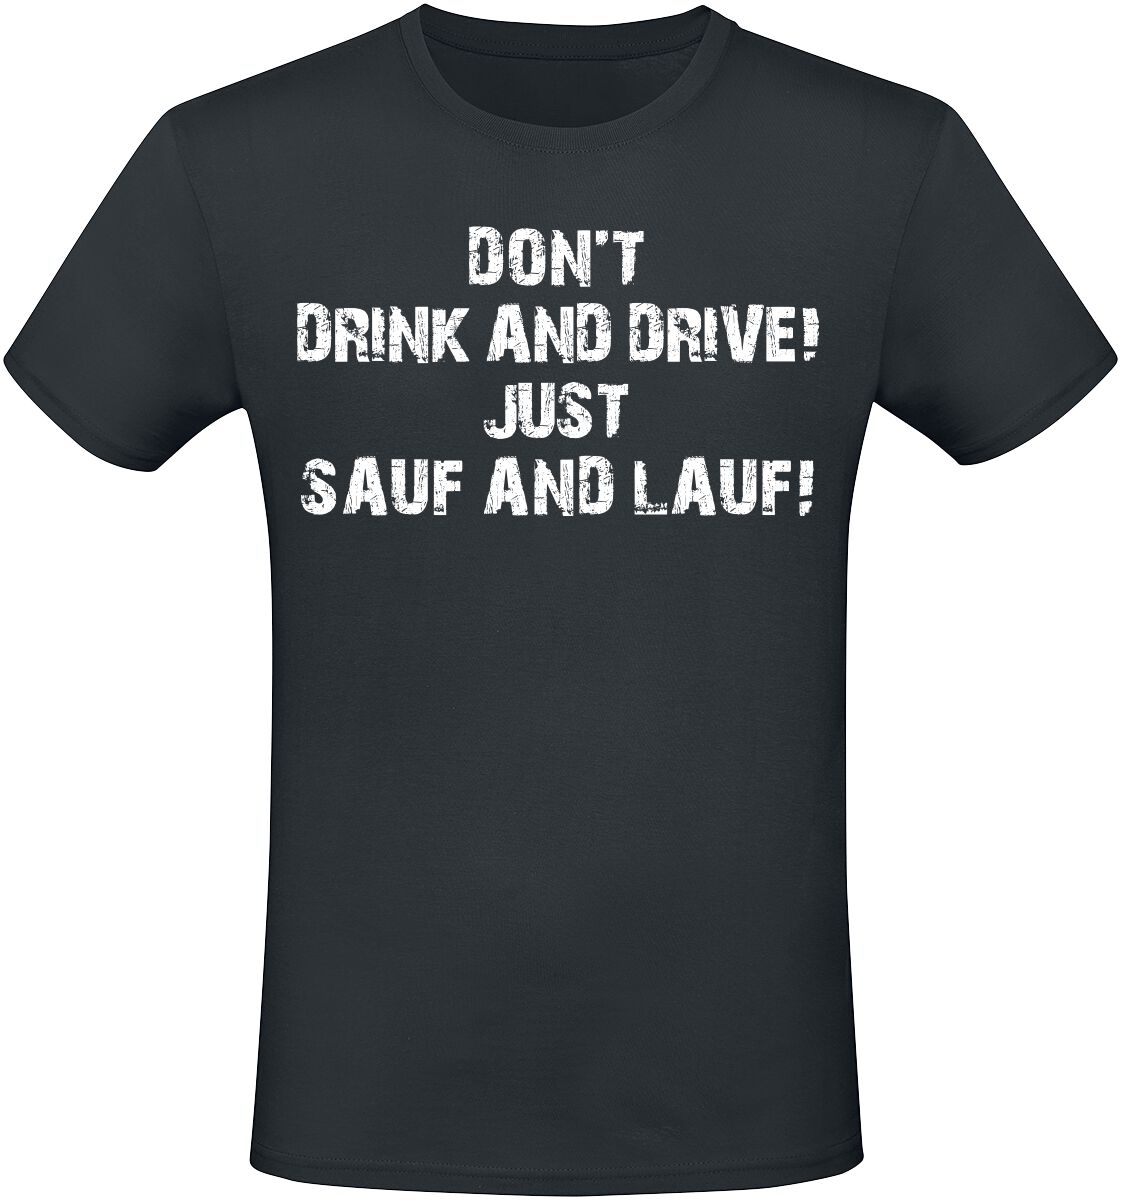 Alkohol & Party Don'T Drink And Drive! Just Sauf And Lauf! T-Shirt schwarz in 3XL von Alkohol & Party